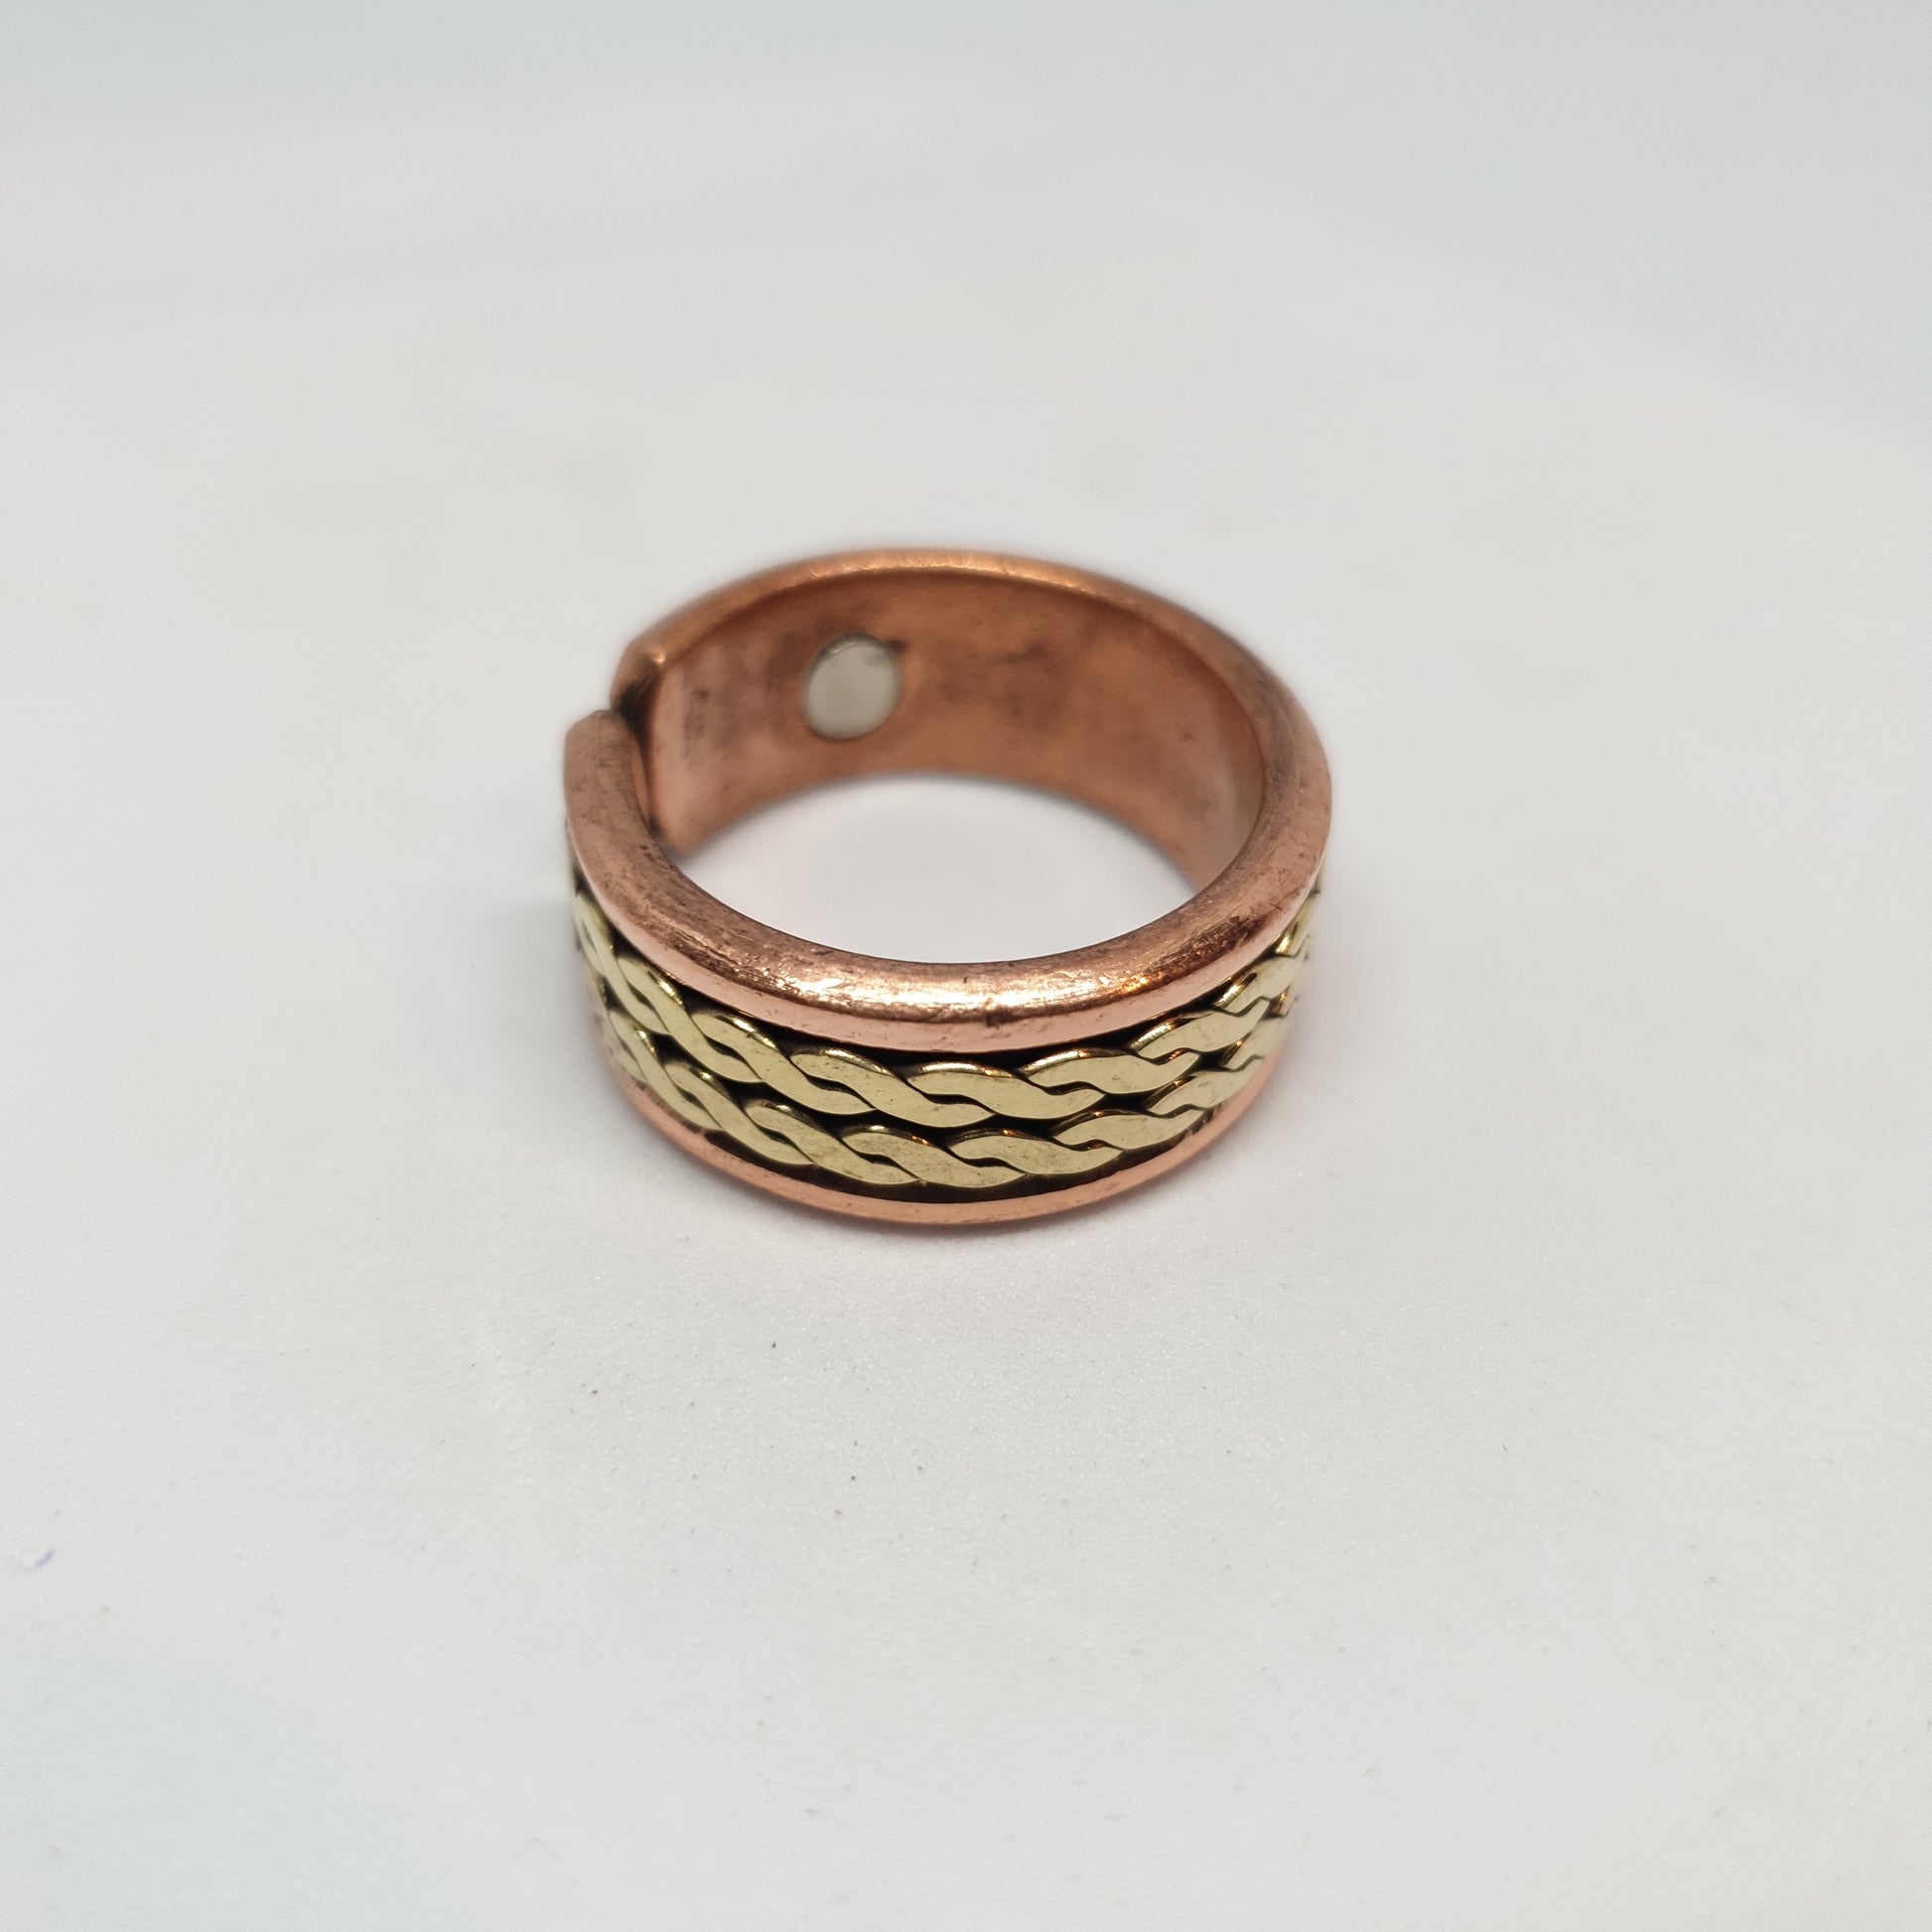 Double Twist Copper Magnetic Ring - Rivendell Shop